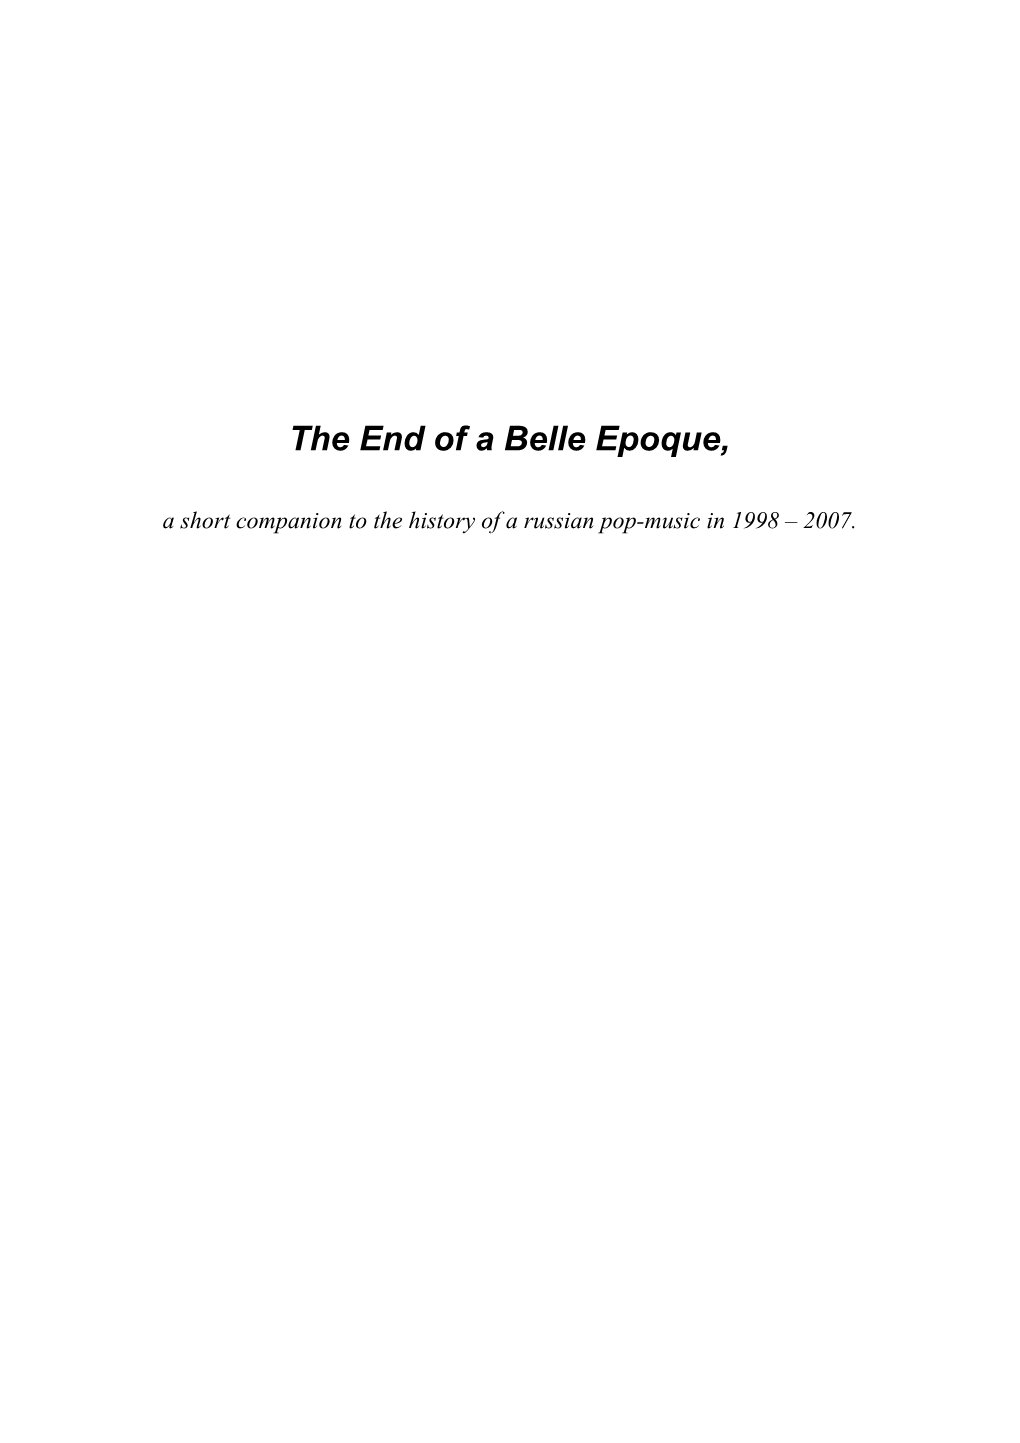 The End of a Belle Epoque, a Short Companion to the History of a Russian Pop-Music in 1998 – 2007